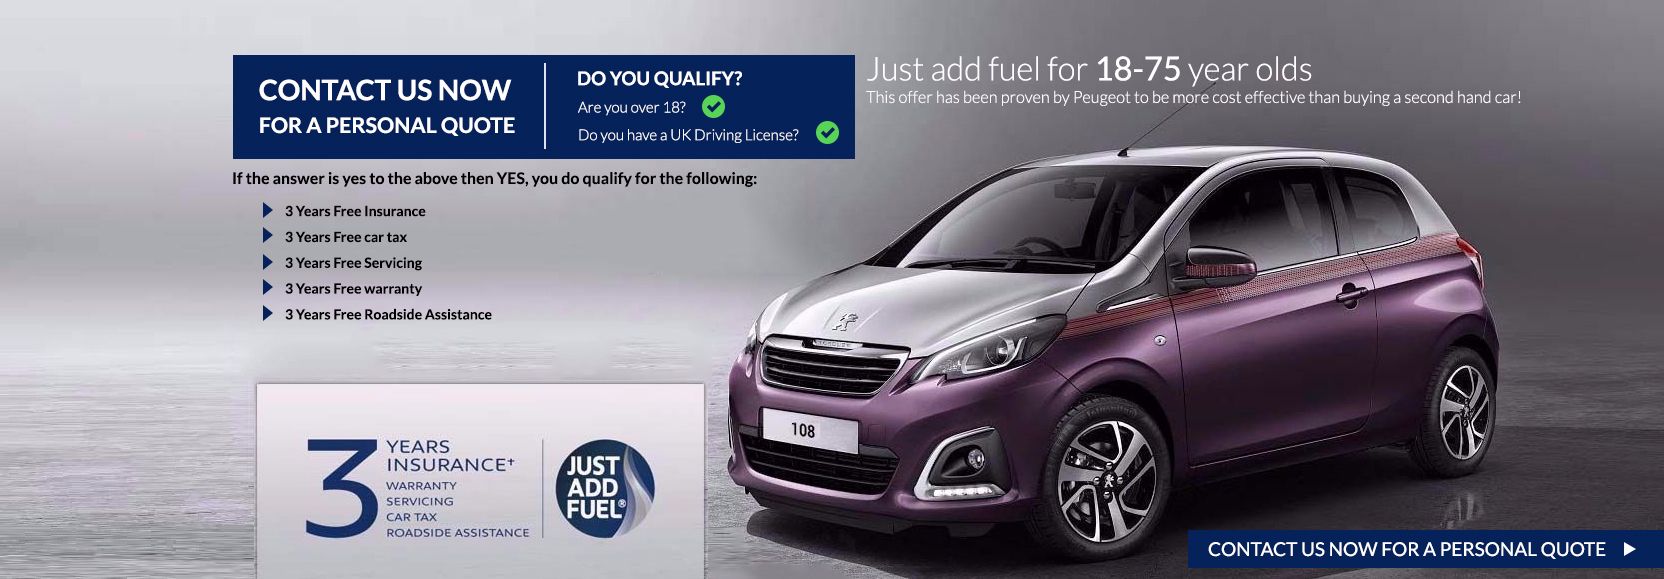 Peugeot 108 | New And Used Peugeot Car Dealers In Cheshire | Gateway Peugeot Crewe